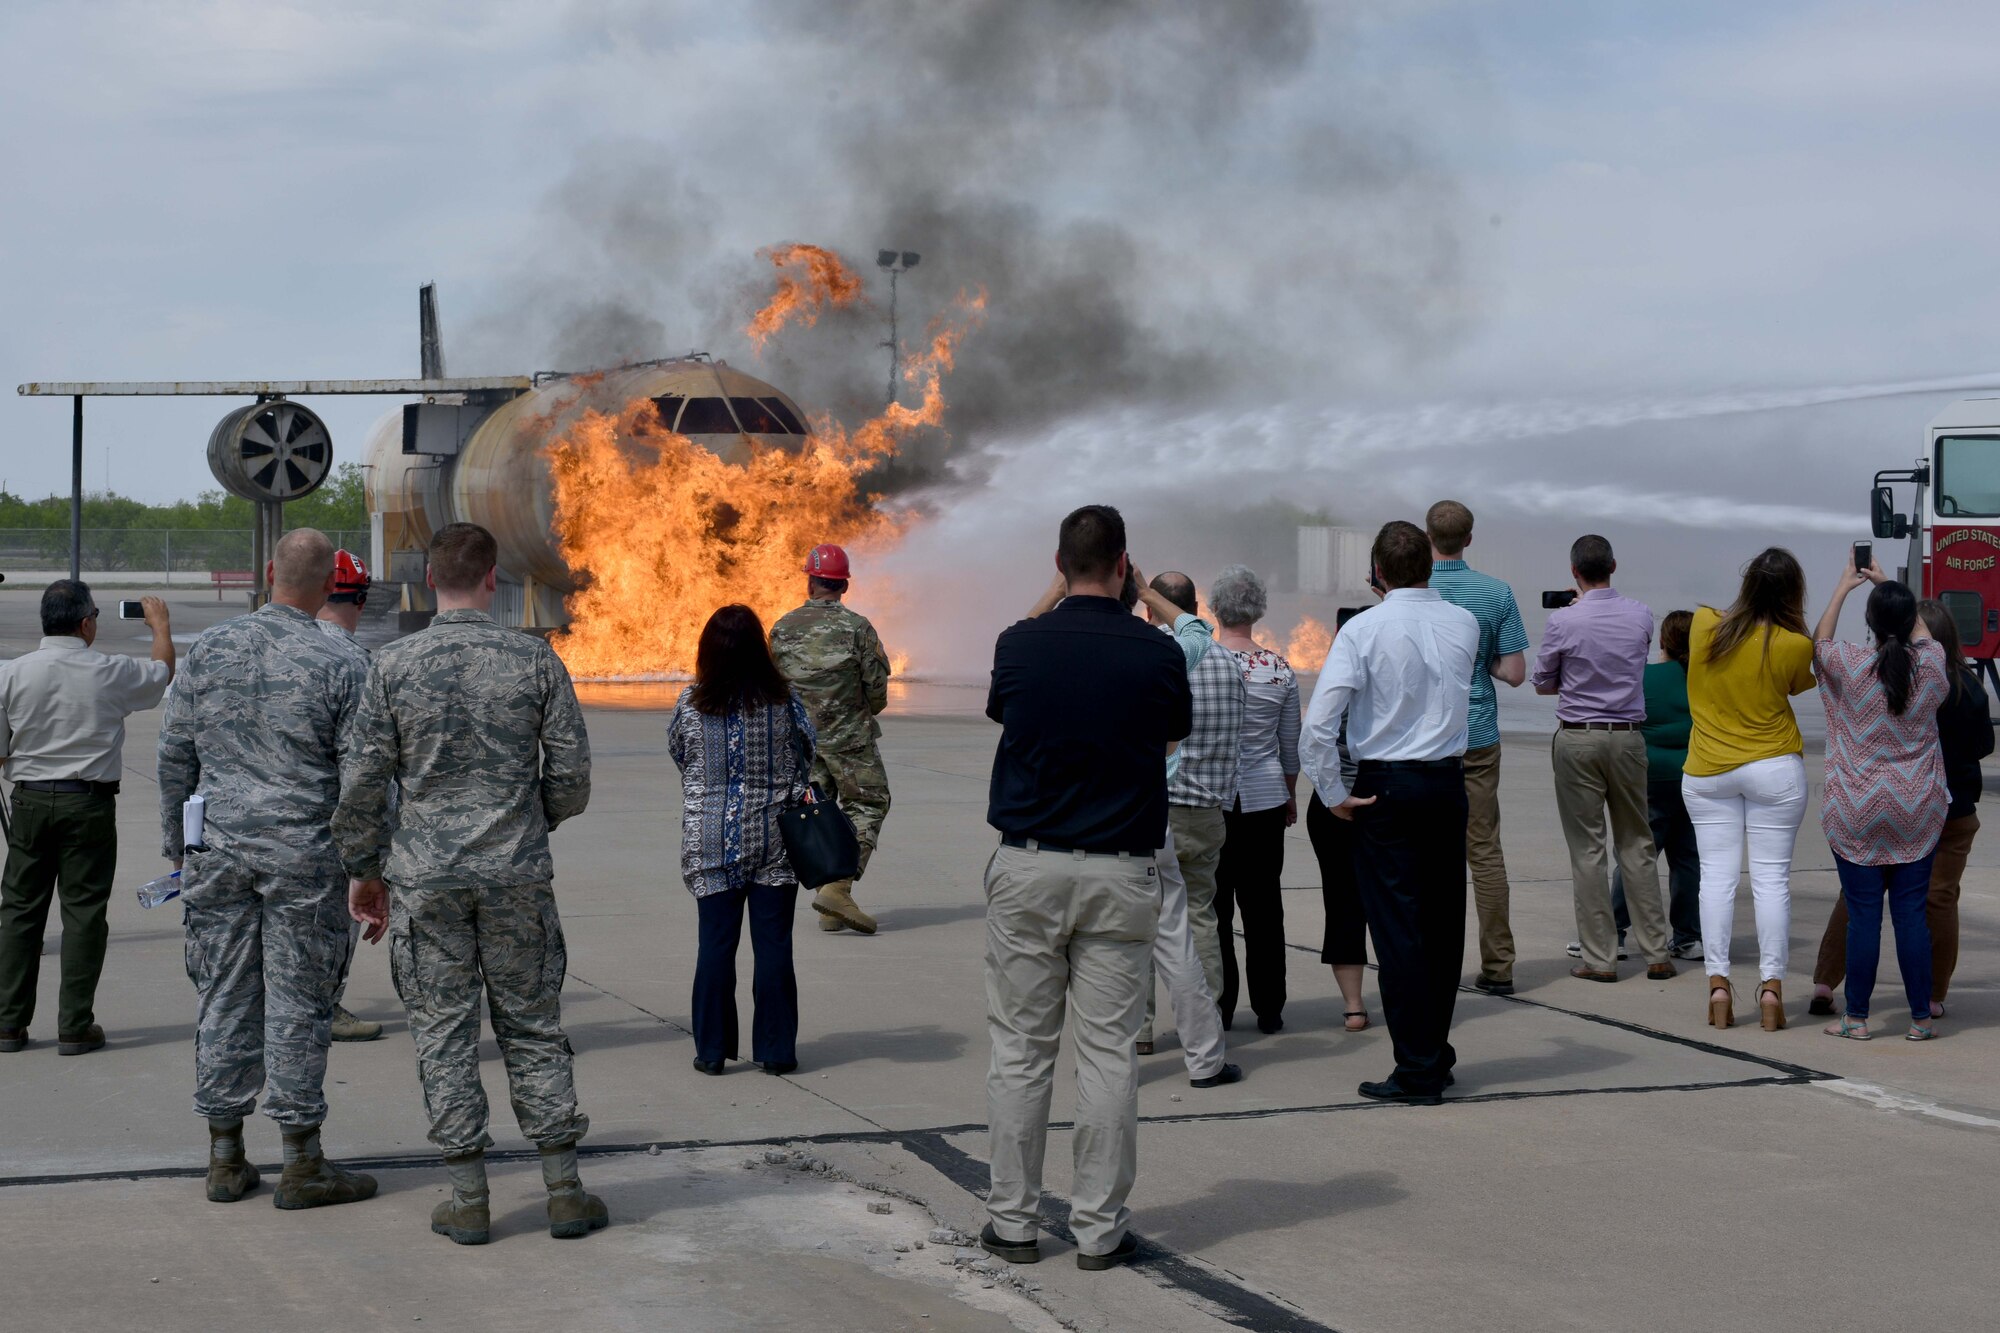 Members from Leadership San Angelo watch a firefighting demonstration at the Louis F. Garland Department of Defense Fire Academy on Goodfellow Air Force Base, Texas, April 12, 2018. Trainees use the controlled fires as a hands-on training experience. (U.S. Air Force photo by Senior Airman Randall Moose/Released)